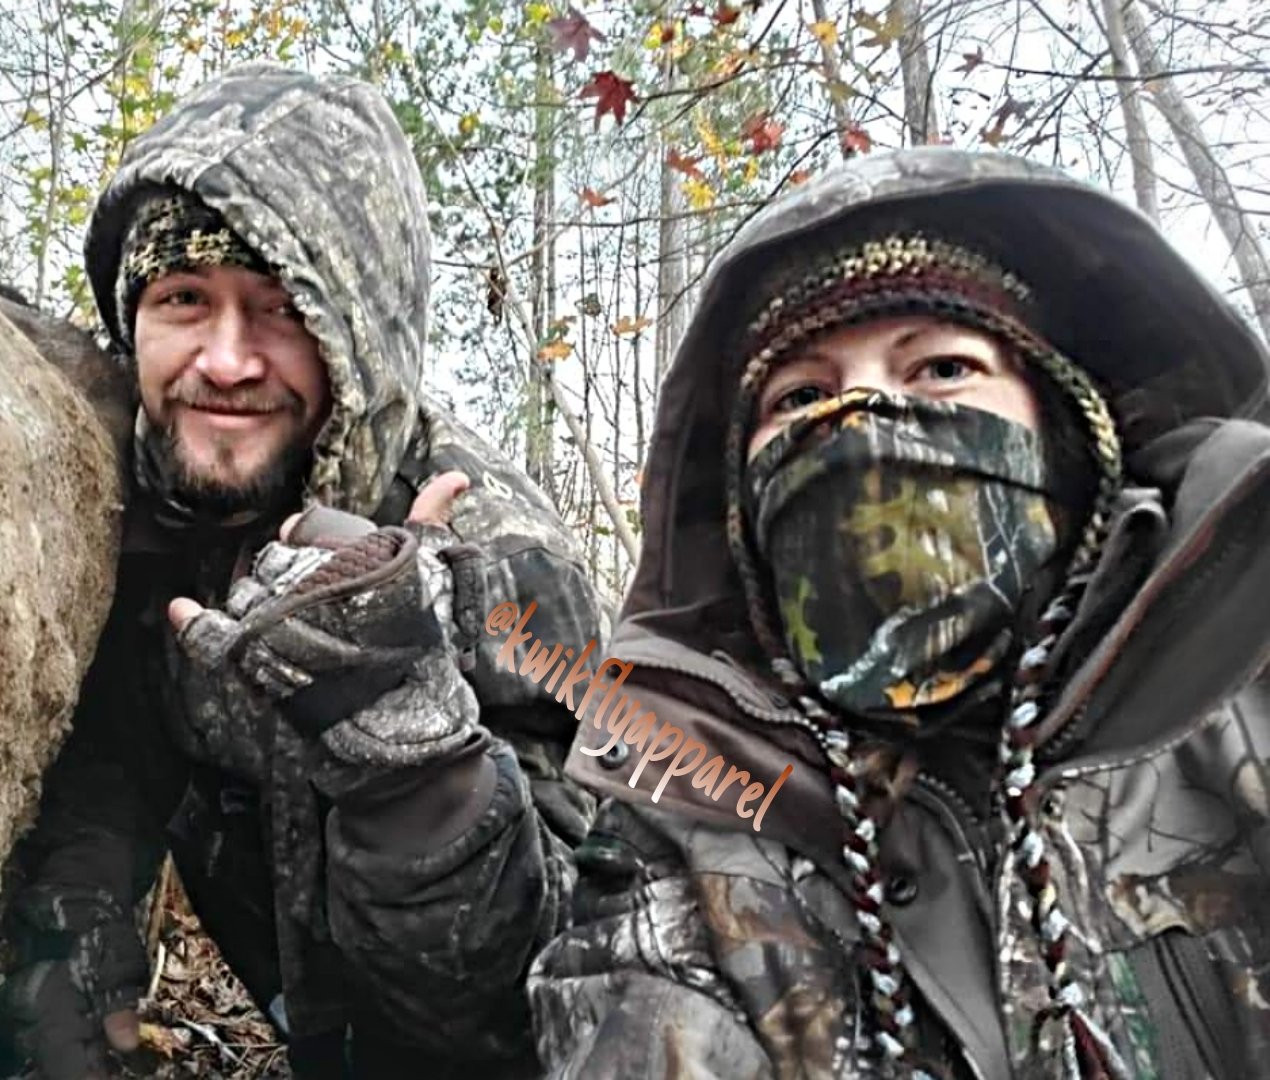 JR and Ben Hunting in Nonnie Handmade Hat.jpg